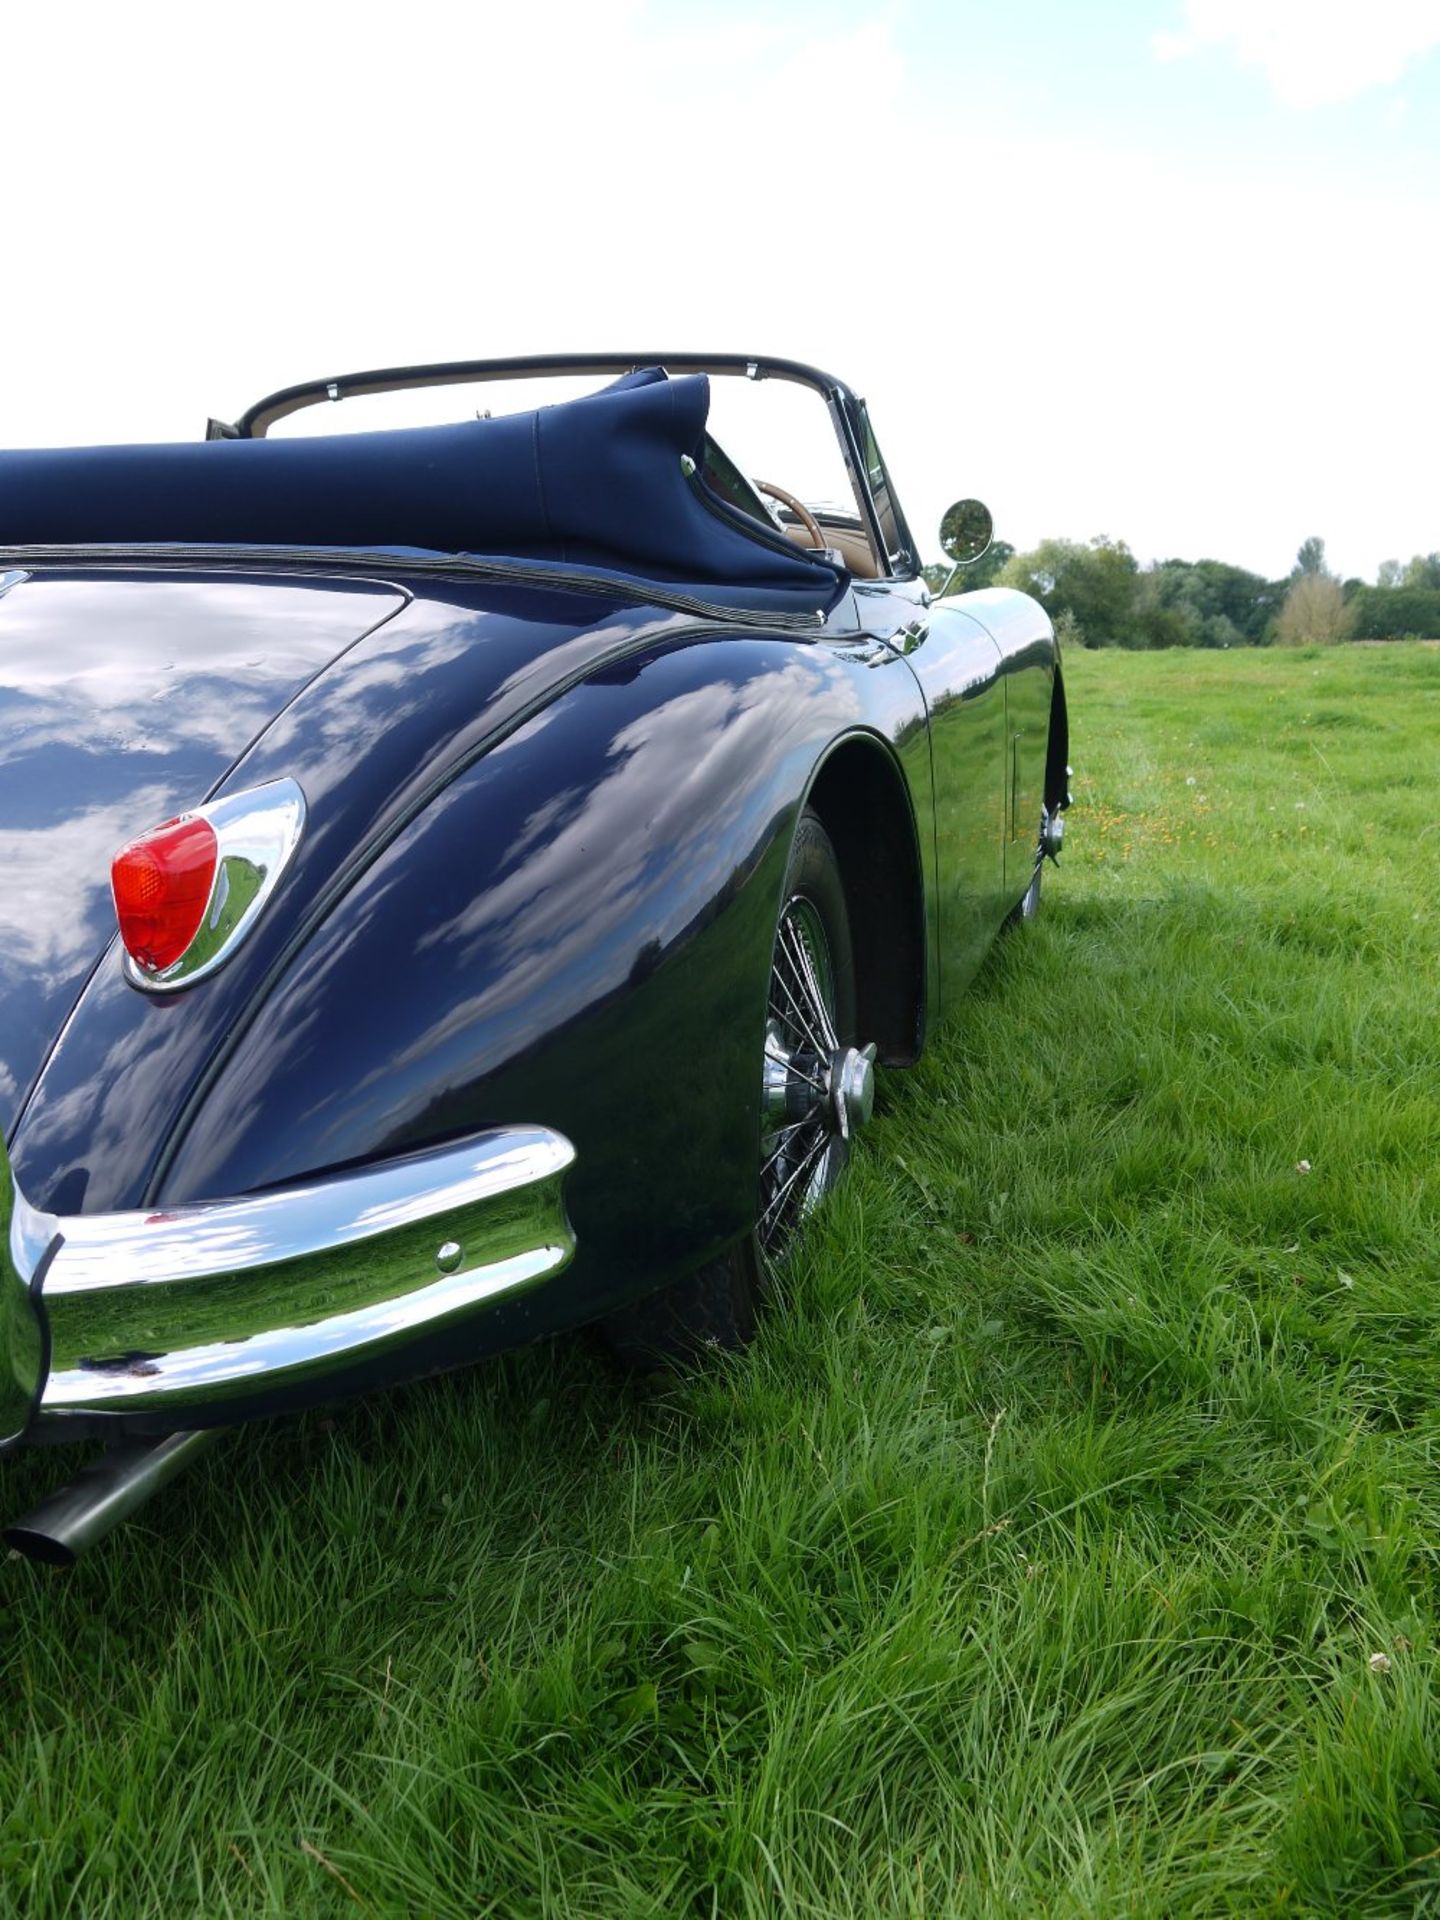 1958 JAGUAR XK150 DROPHEAD COUPE Registration Number: SSU 260 Chassis Number: S837226 Recorded - Image 13 of 26